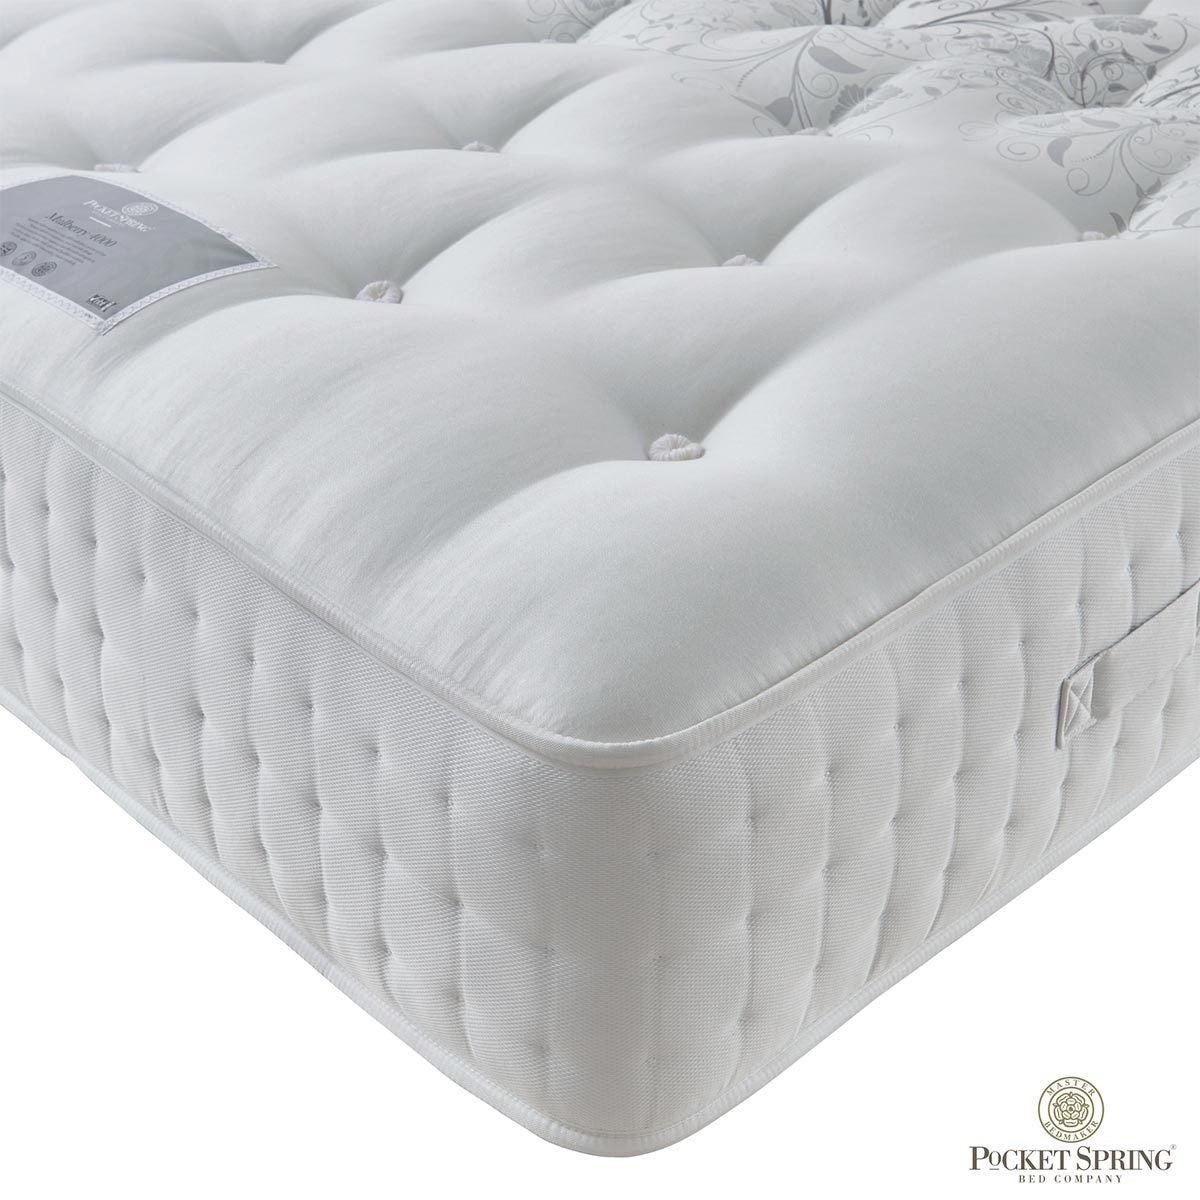 Pocket Spring Bed Company Mulberry Mattress, King